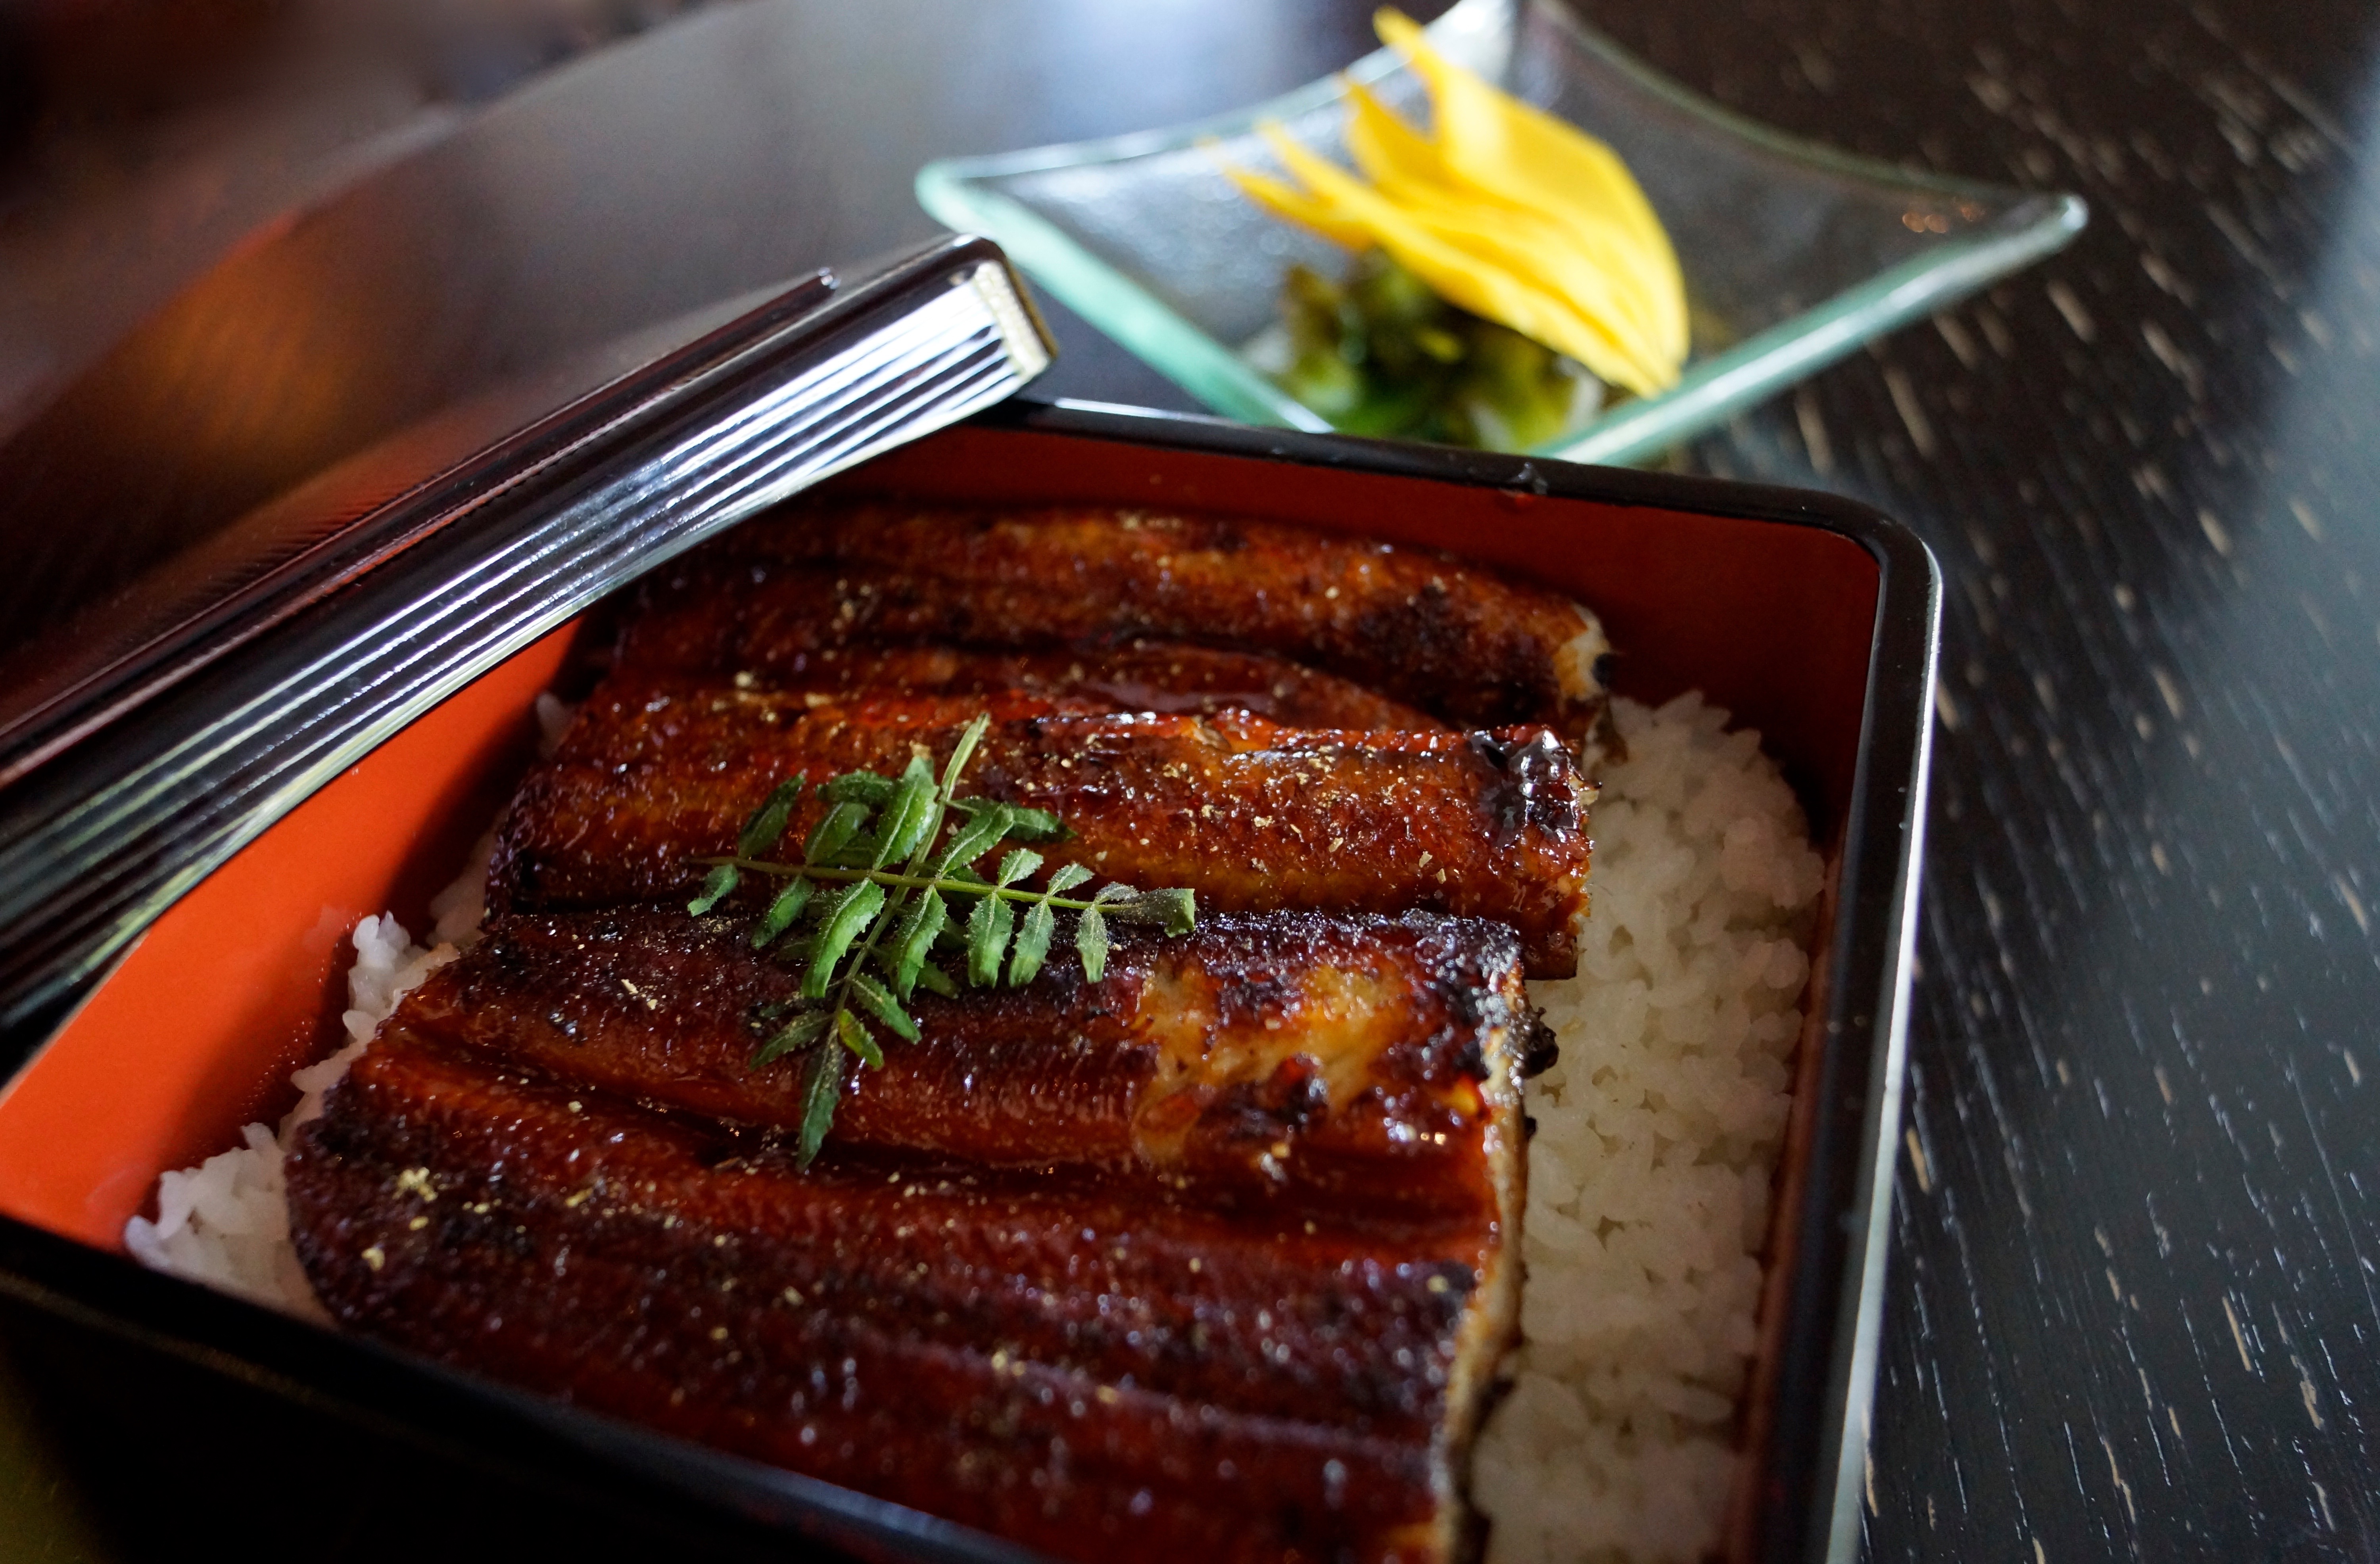 Sushiko will be serving ina-jyu, a dish made of broiled eel and rice, all month long. (Photo: Paula Olinto)